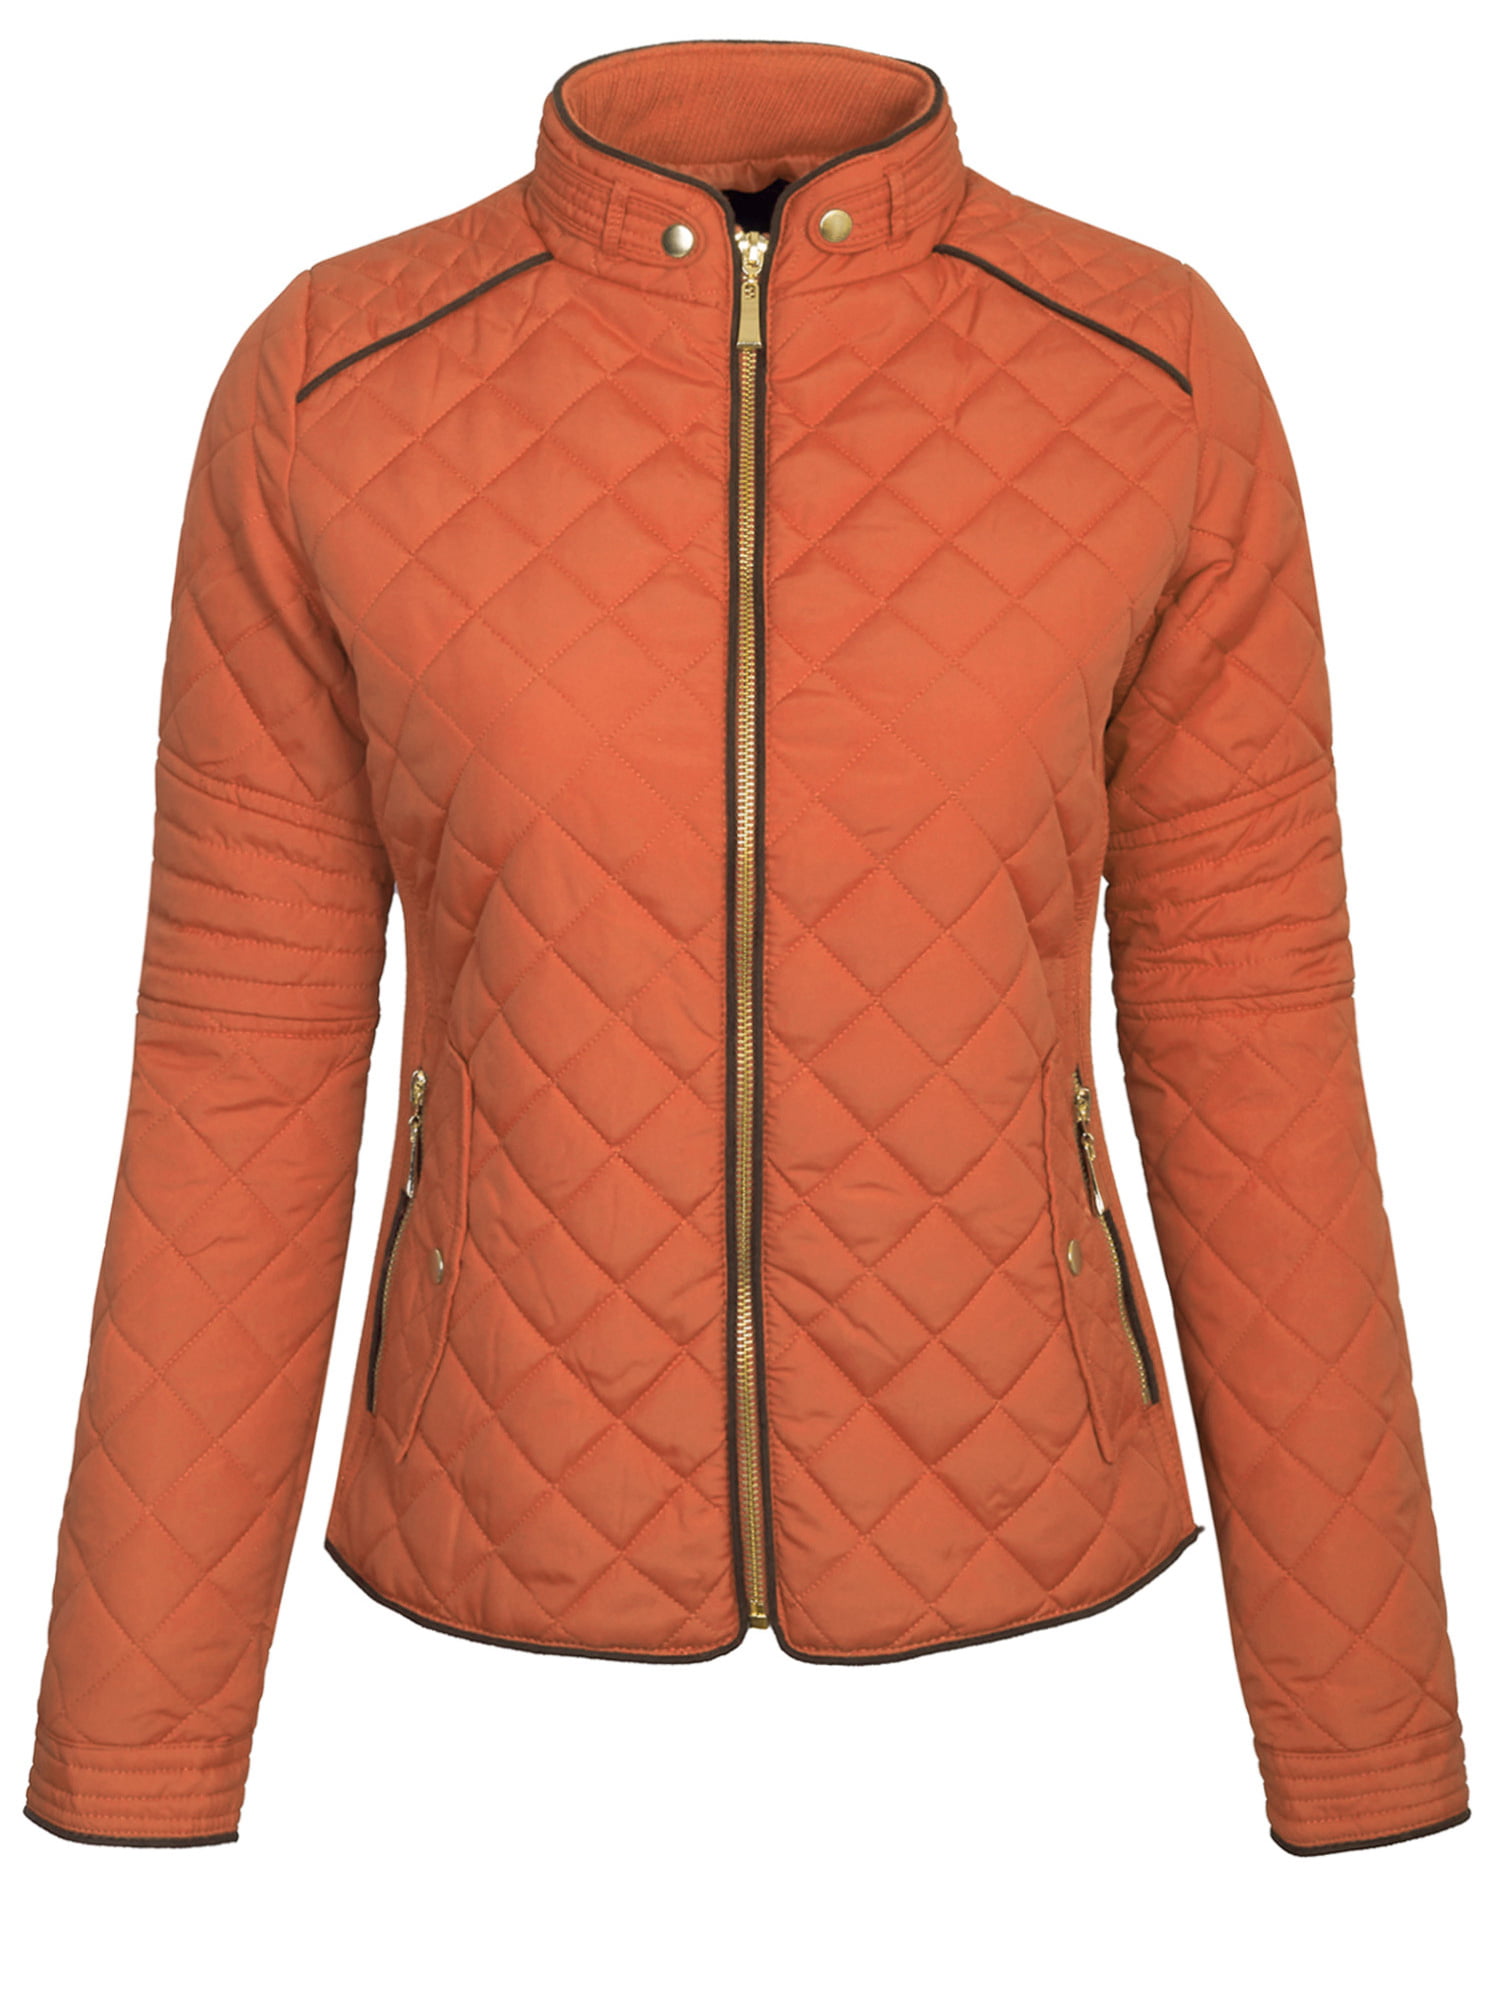 KOGMO Womens Quilted Jacket Fully Lined Lightweight Zip Up Jacket S-3X ...